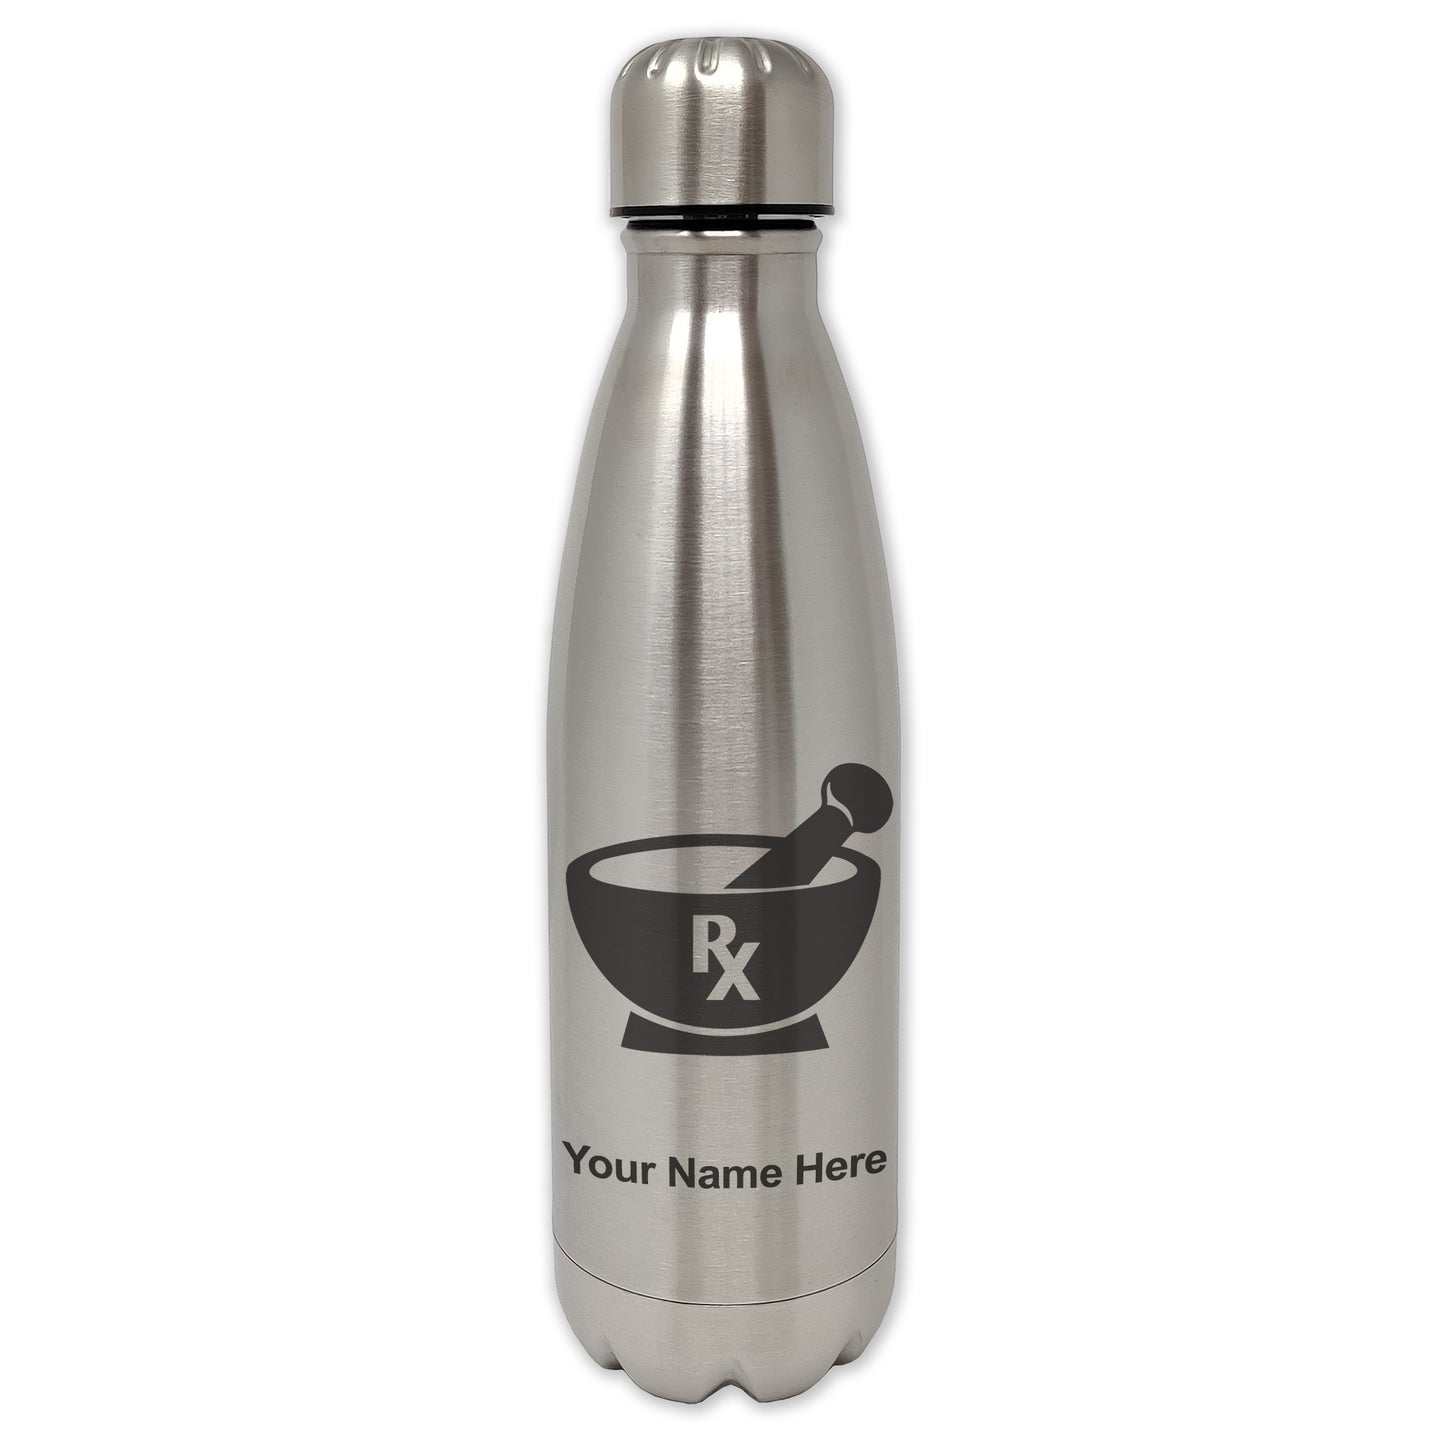 LaserGram Single Wall Water Bottle, Rx Pharmacy Symbol, Personalized Engraving Included